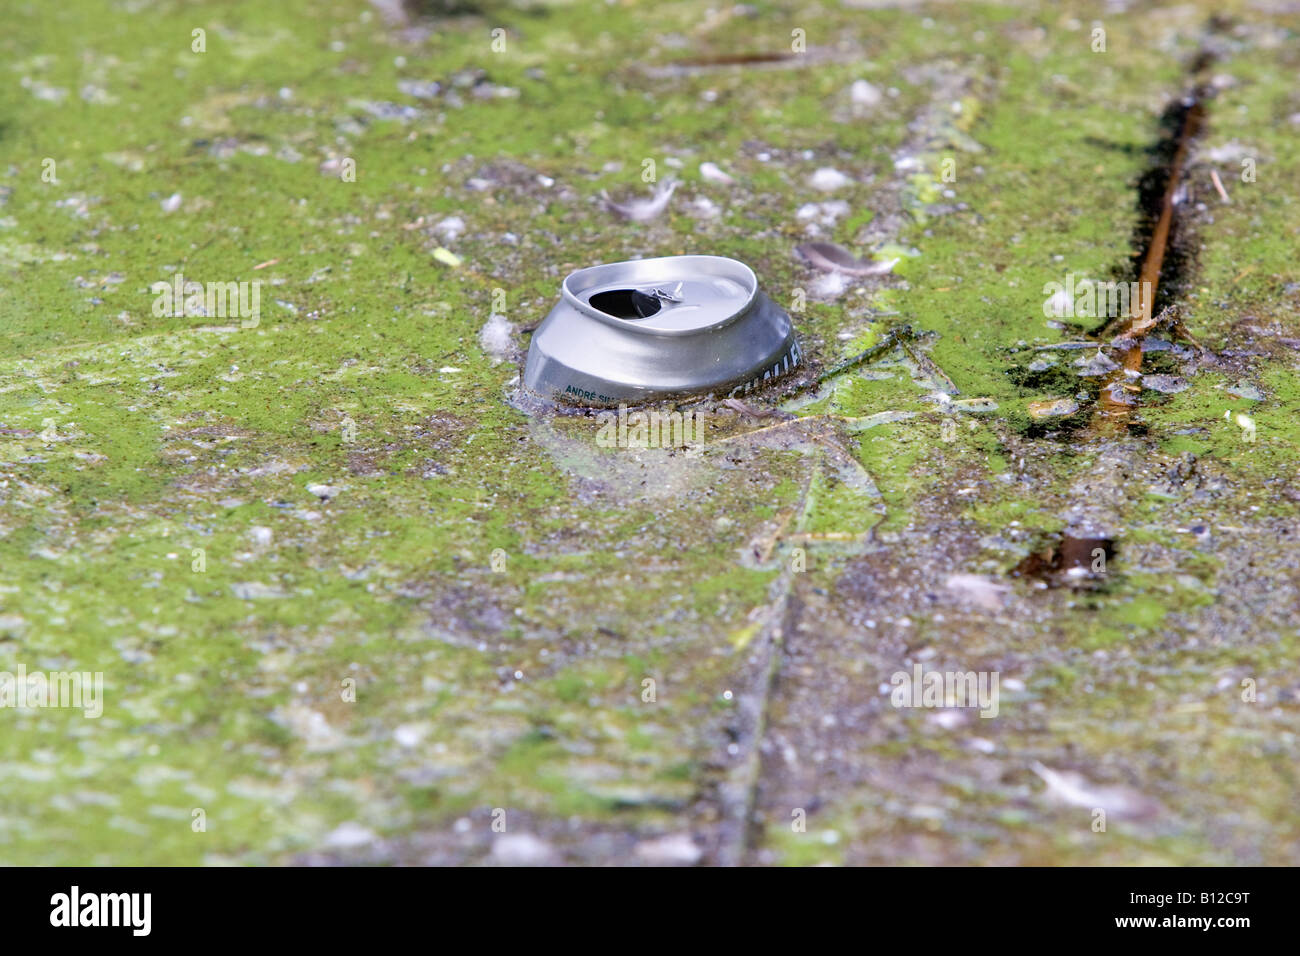 A drink can floating in water surrounded by blue green algae (Cyanobacteria) Stock Photo